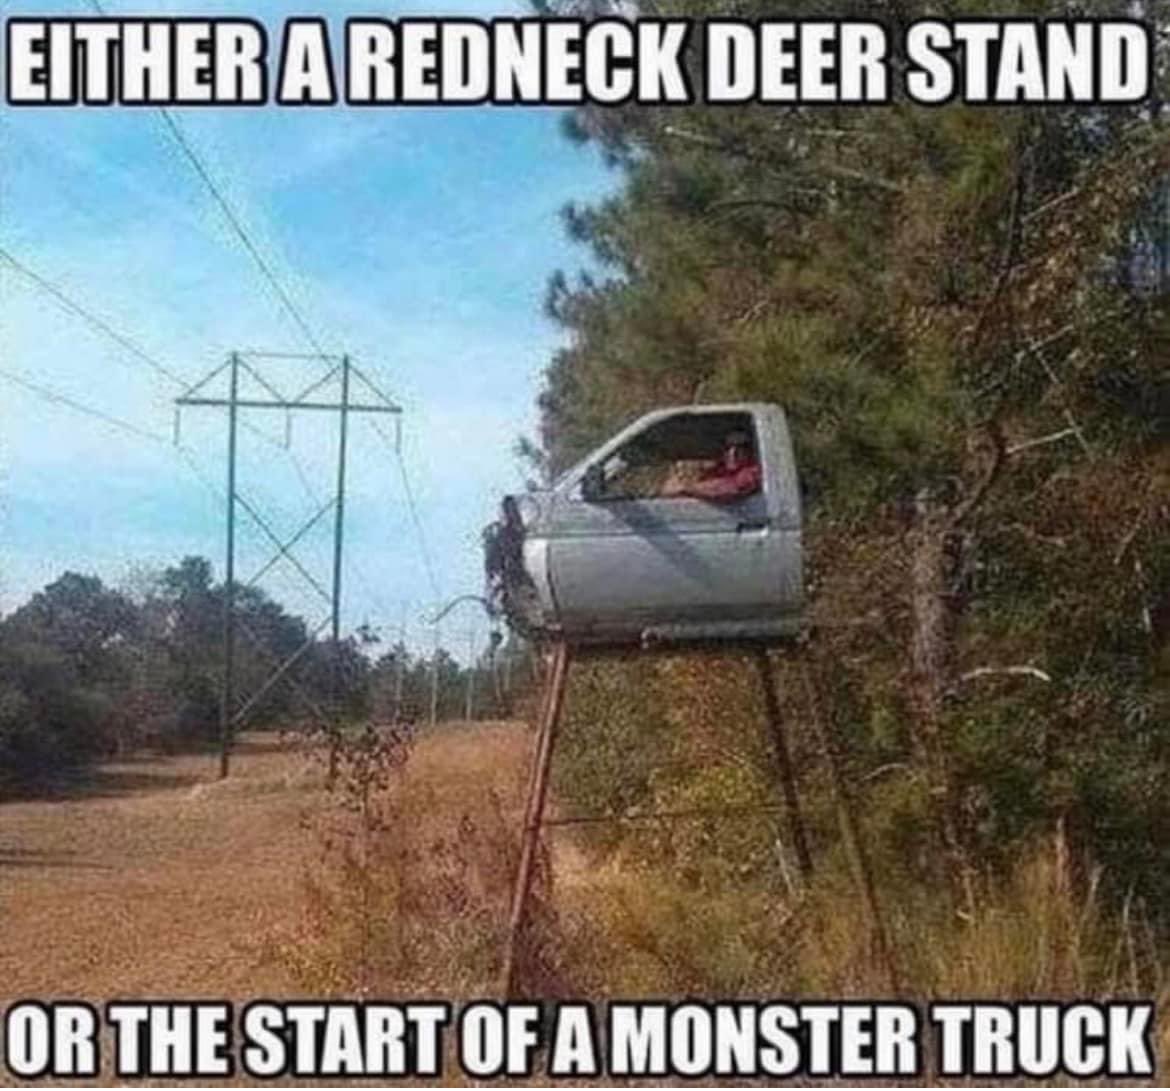 That is one way to do it! Bro neck just turned three shades more red! Also mad props!

#MonsterTruck #MonsterBuck #RedNeck #1990Chevy #ChevyTruck #DeerStand #SingleCab #OffRoad #OffRoadXtreme